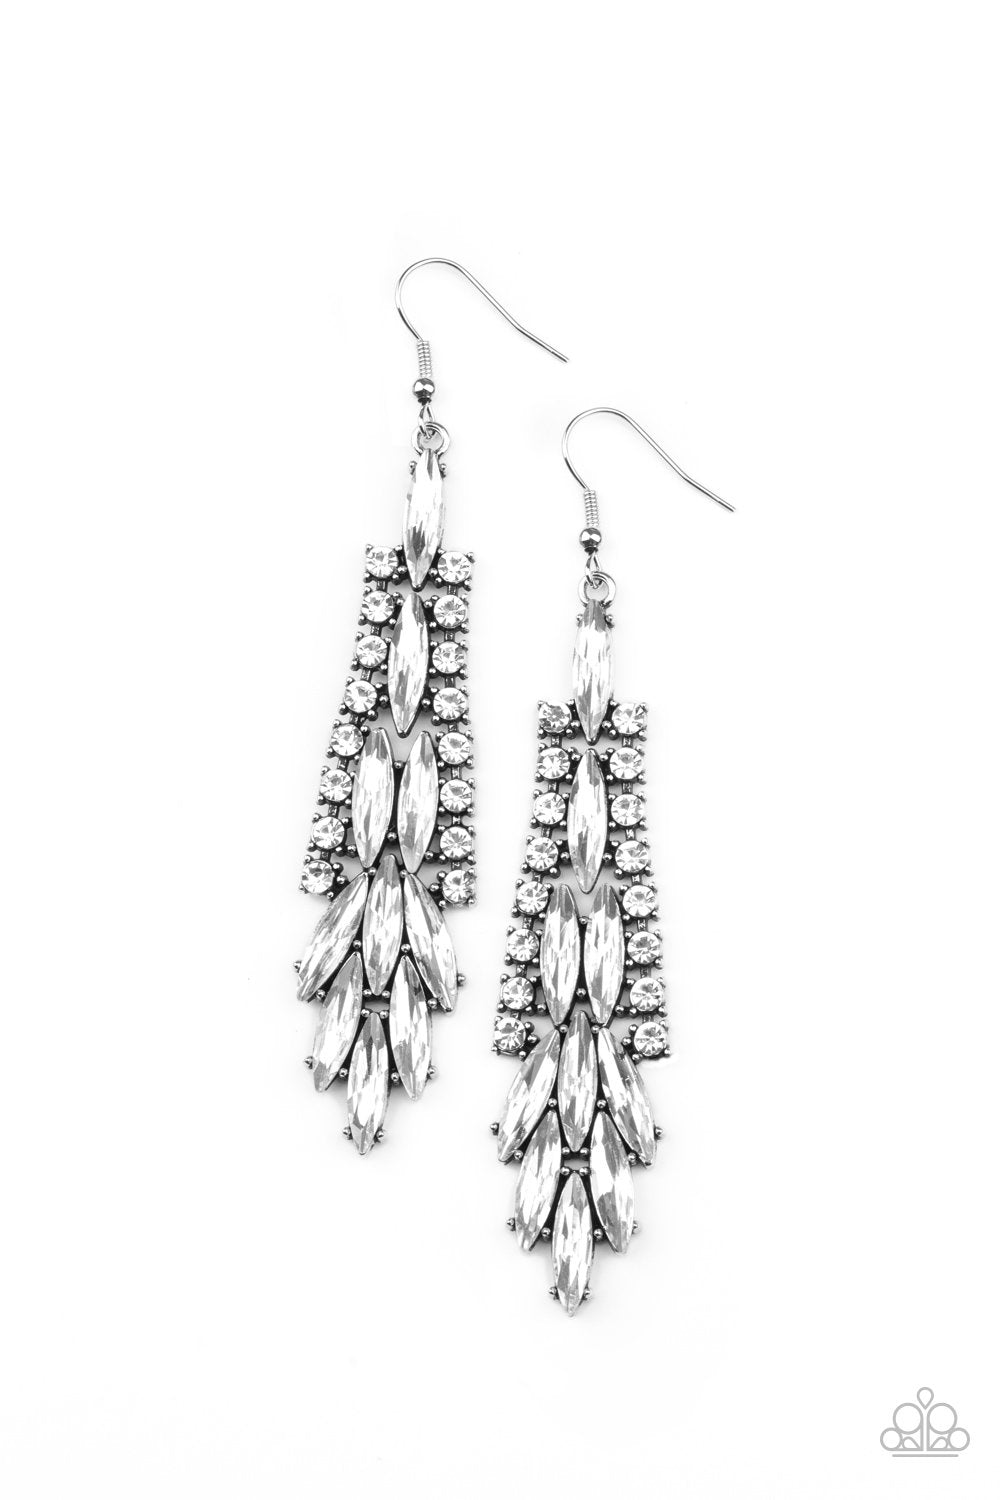 Crown Heiress White Rhinestone Earrings - Paparazzi Accessories- lightbox - CarasShop.com - $5 Jewelry by Cara Jewels